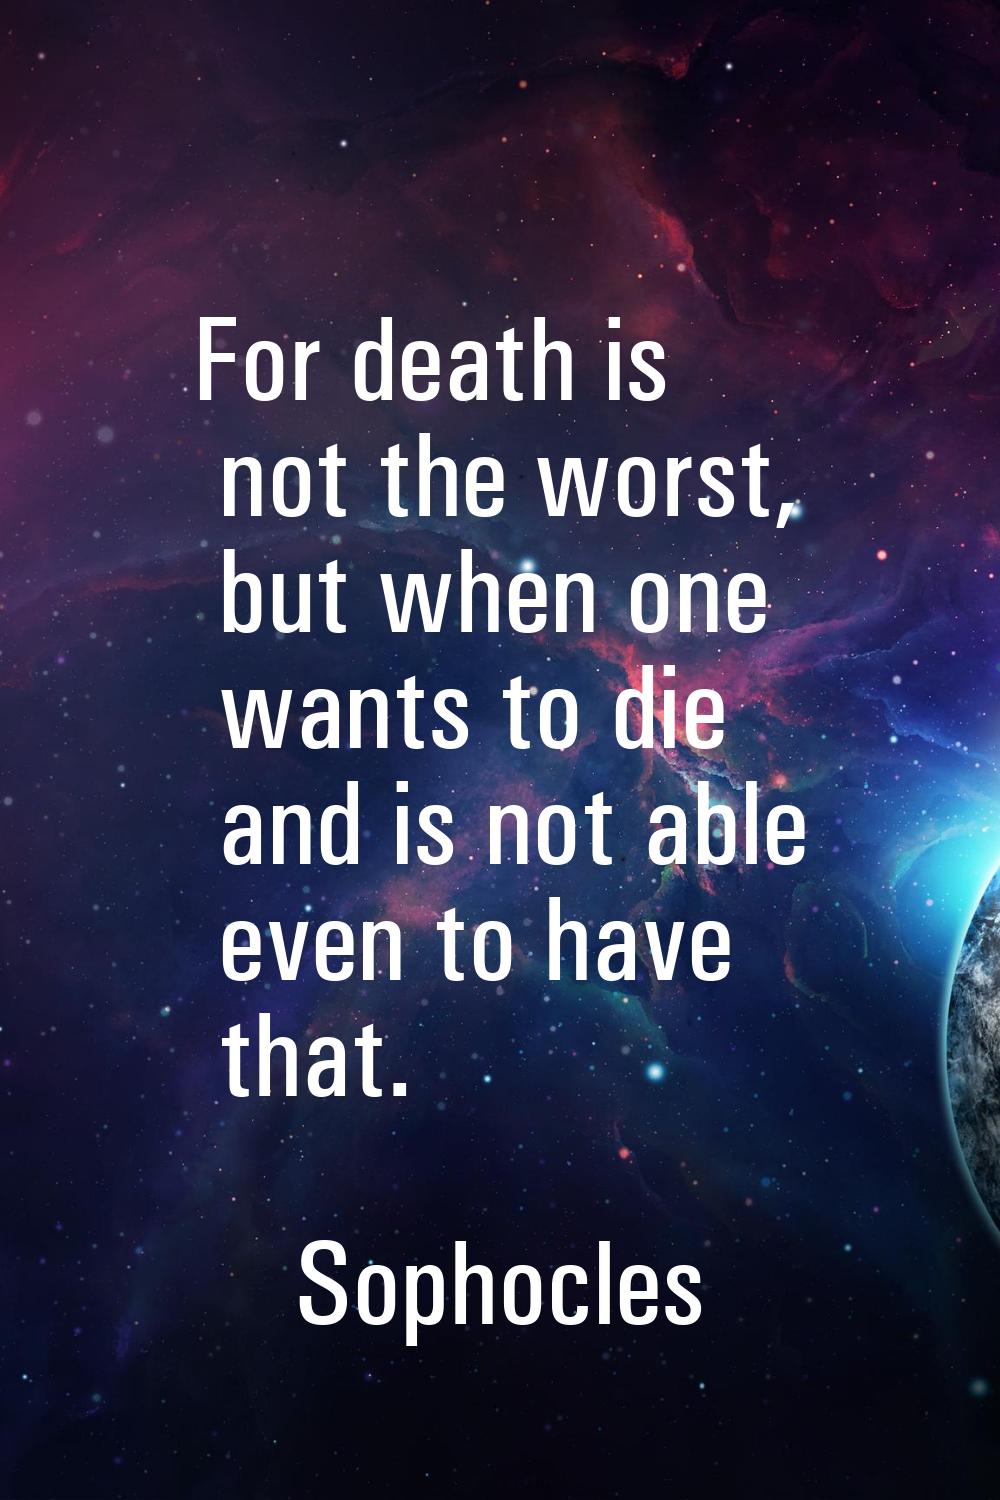 For death is not the worst, but when one wants to die and is not able even to have that.